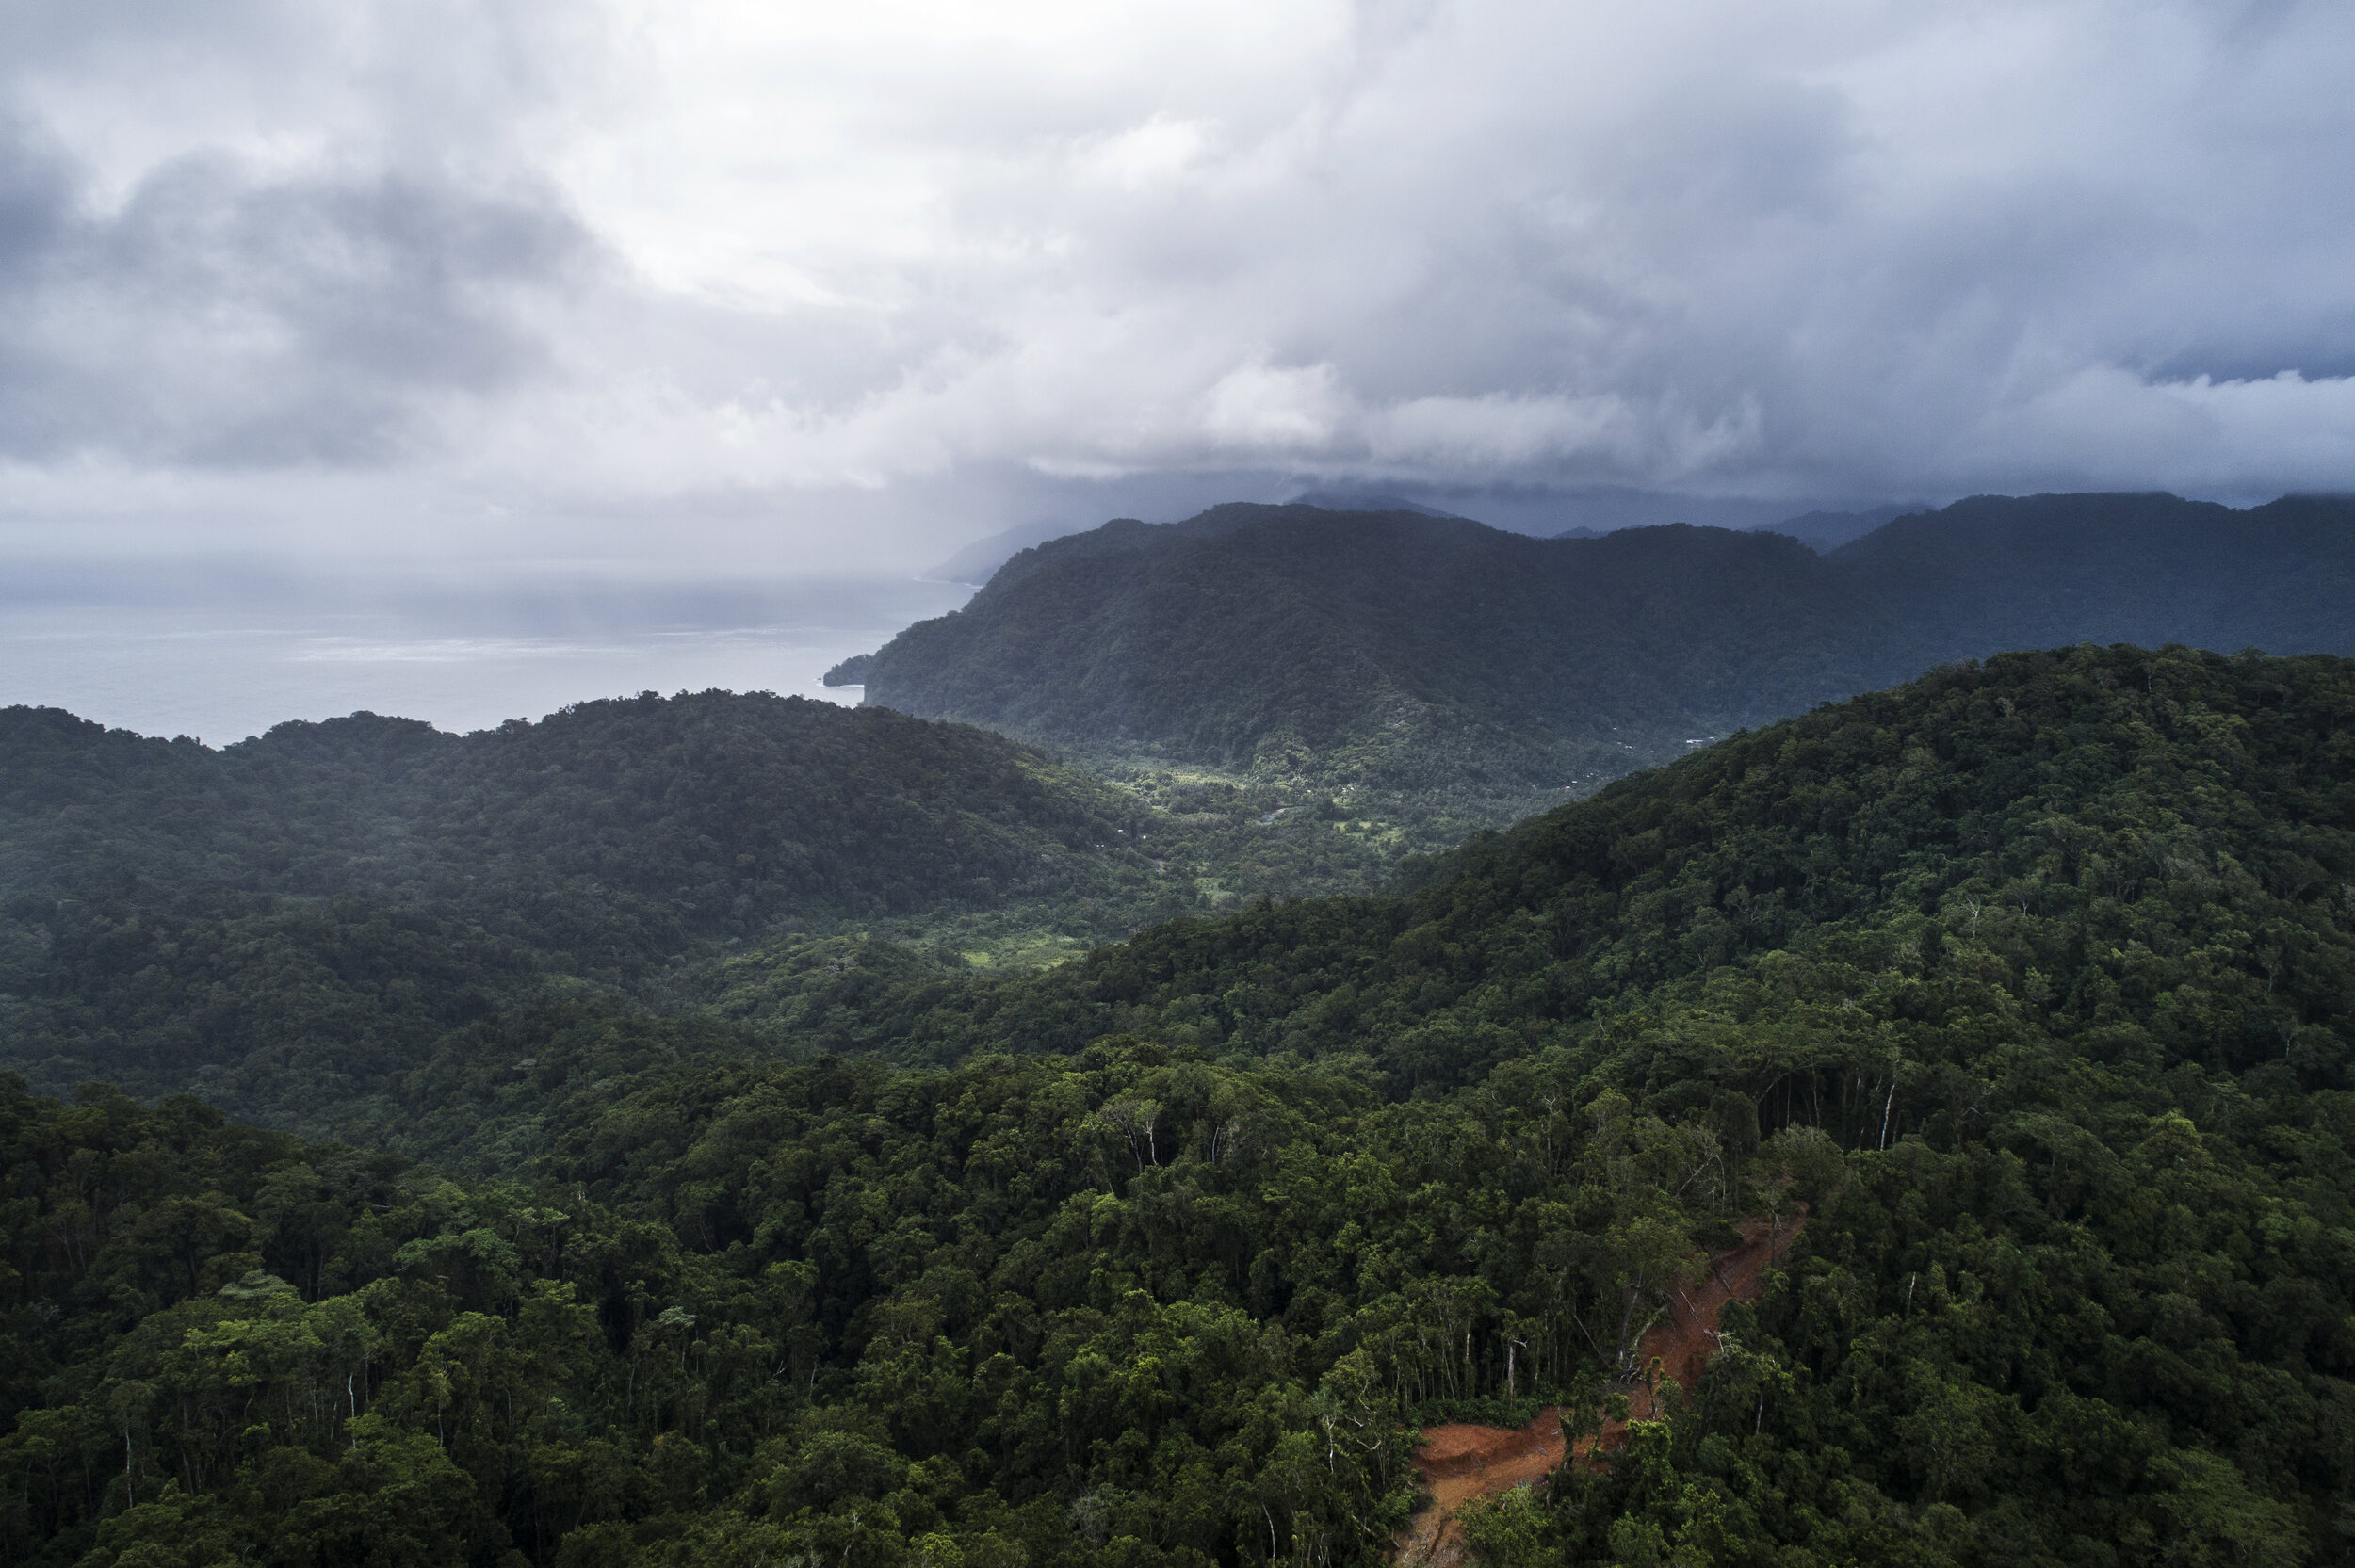  The village of Marasa and surrounding valley can be seen from the former logging camp. A logging road leads up to the main camp of the Galego company before they were ejected by a group of locals who ejected the company through legal means. Logging 